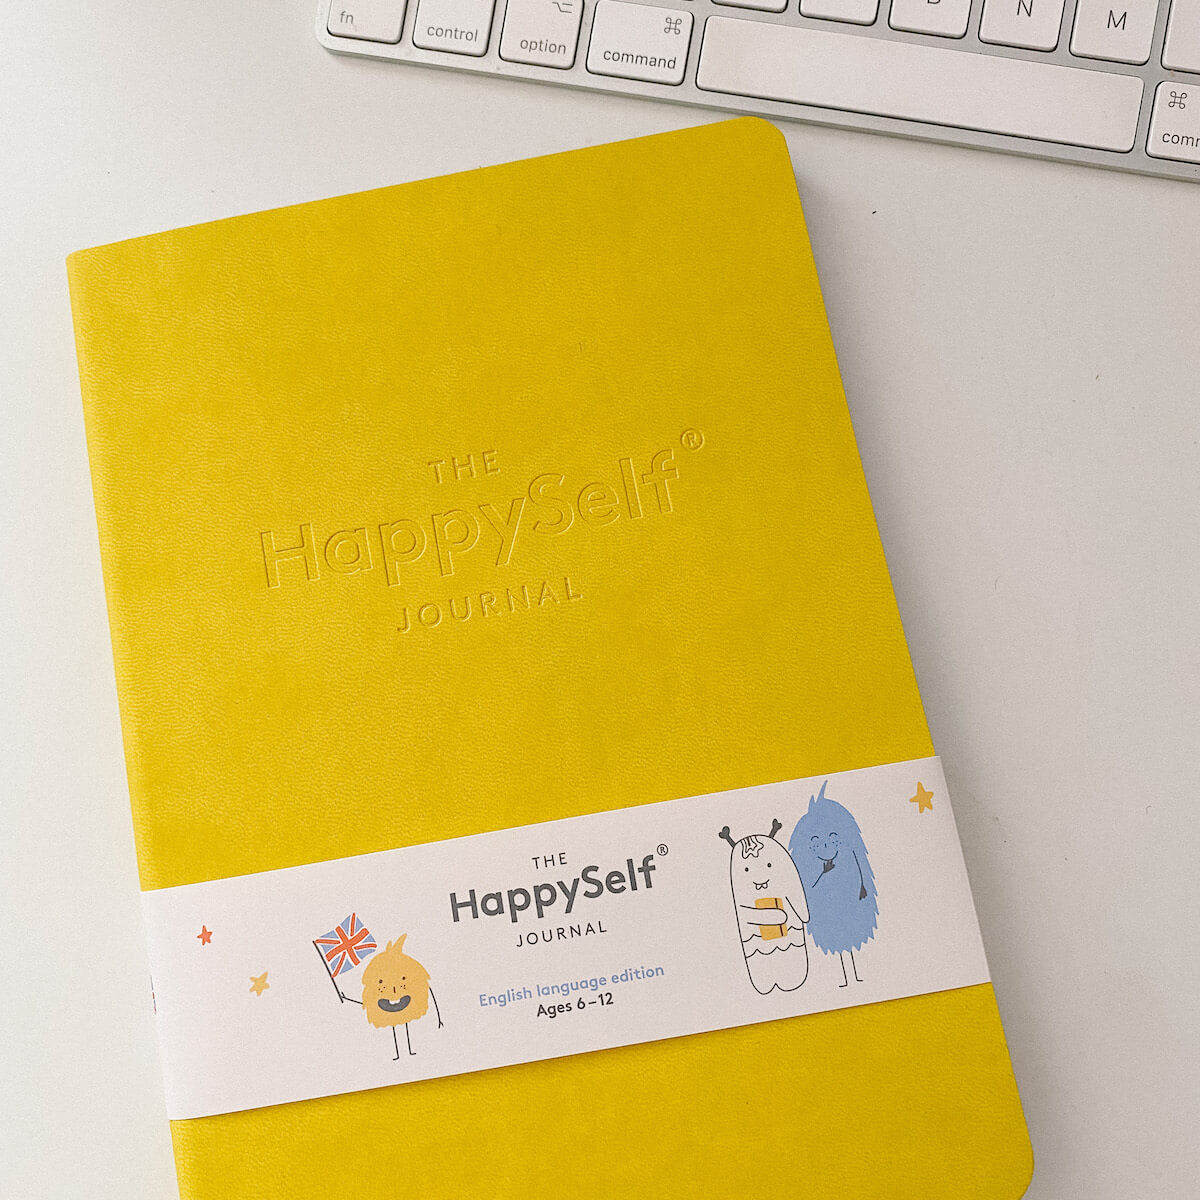 The happy self journal on desk with apple keyboard